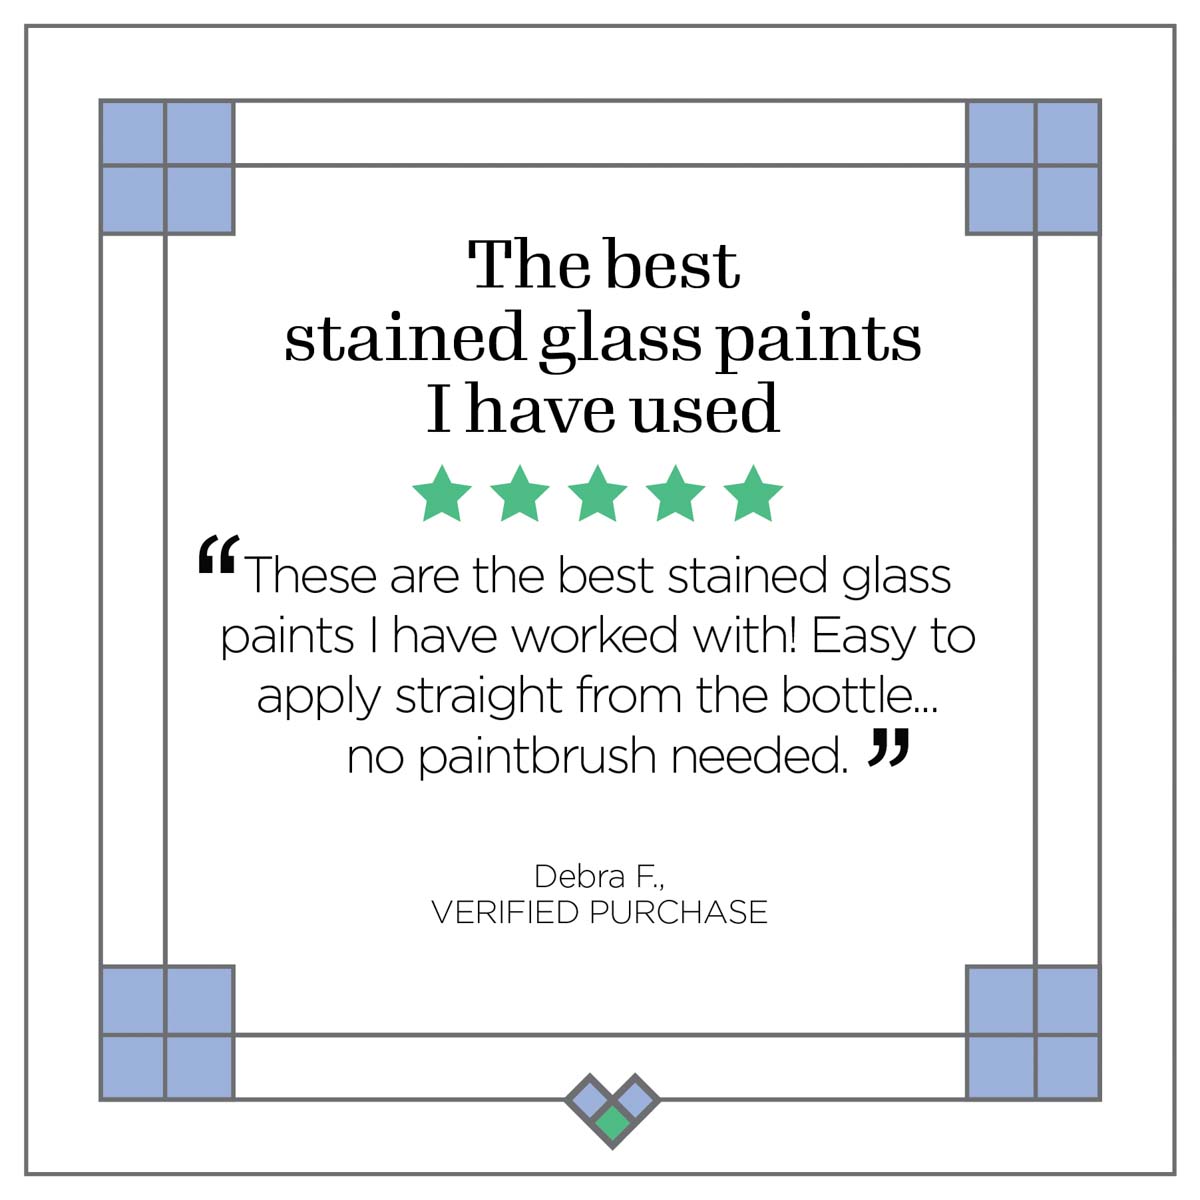 Shop Plaid Gallery Glass ® Stained Glass Effect Paint - Lime Green, 2 oz. -  19710 - 19710